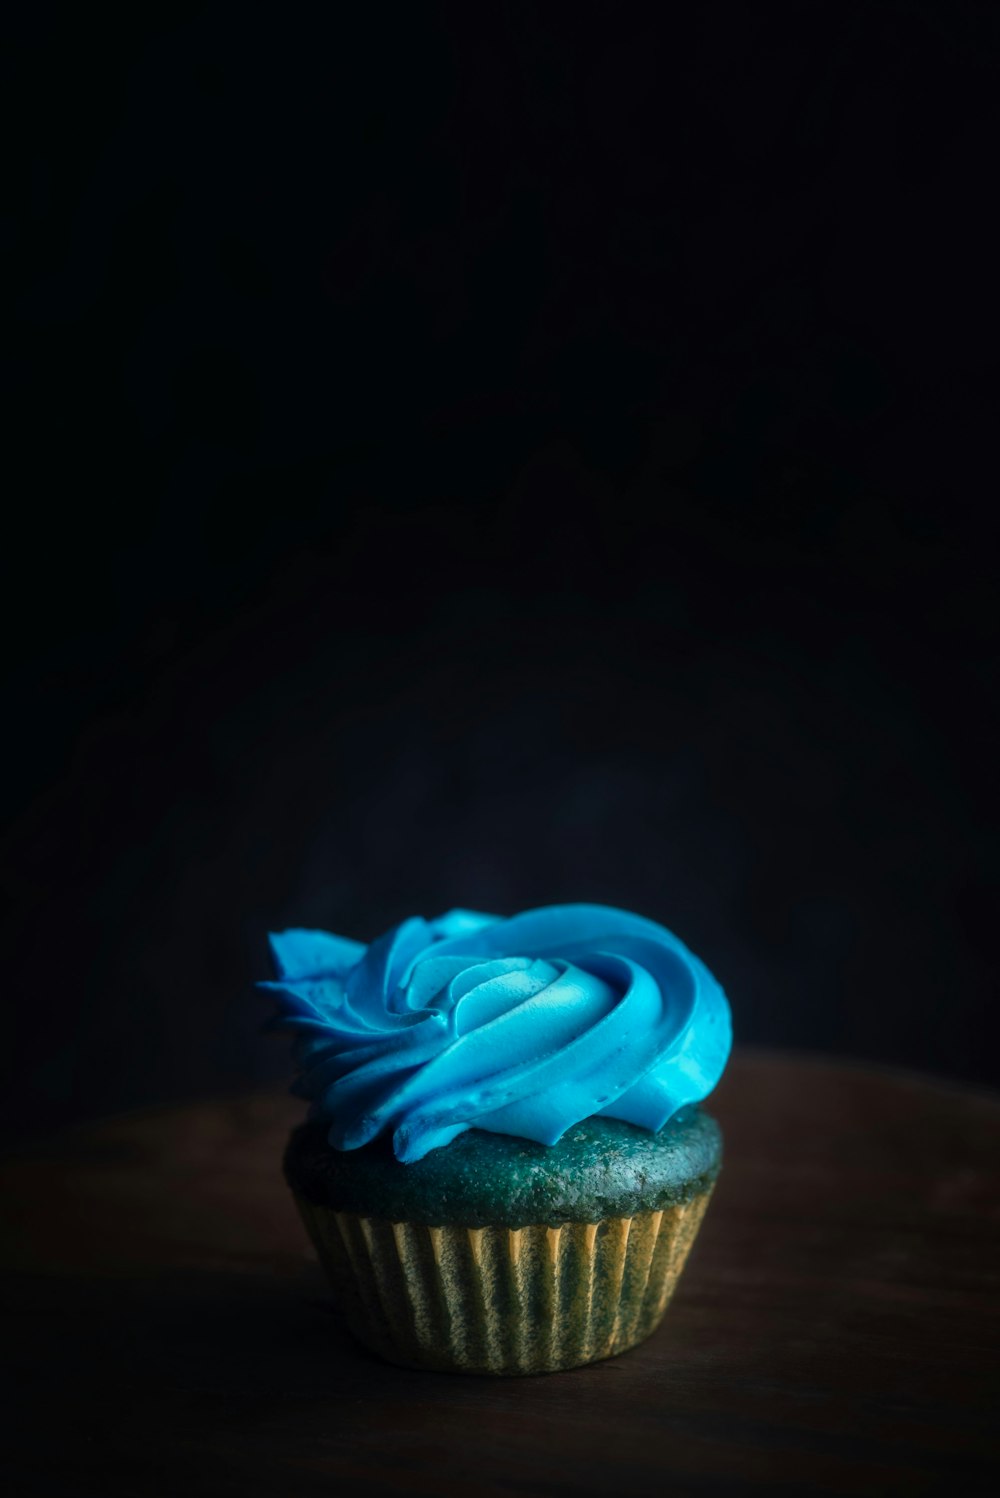 a cupcake with blue frosting on a wooden table